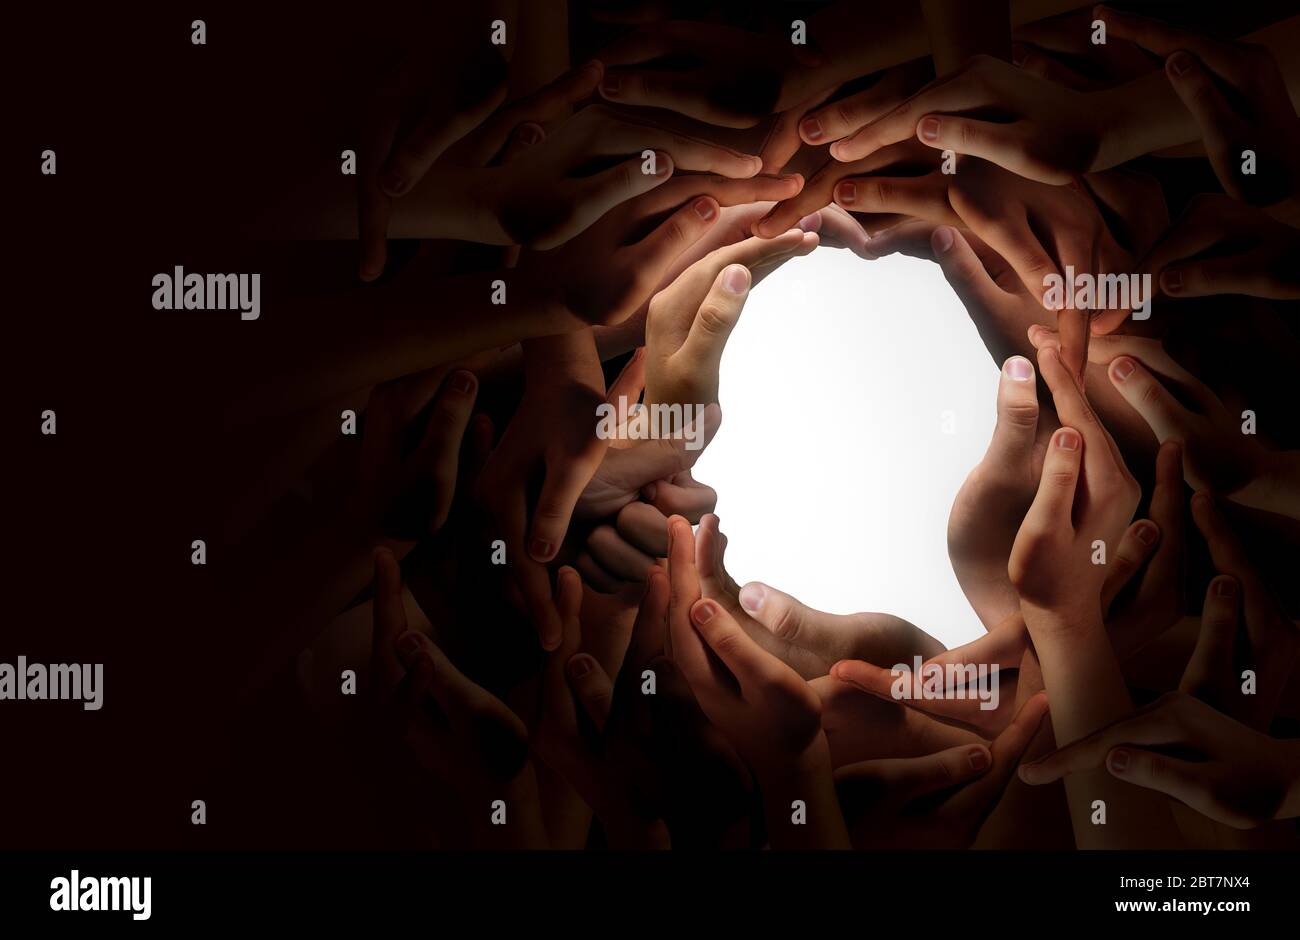 Diverse people together holding hands as a unity and partnership concept. Stock Photo